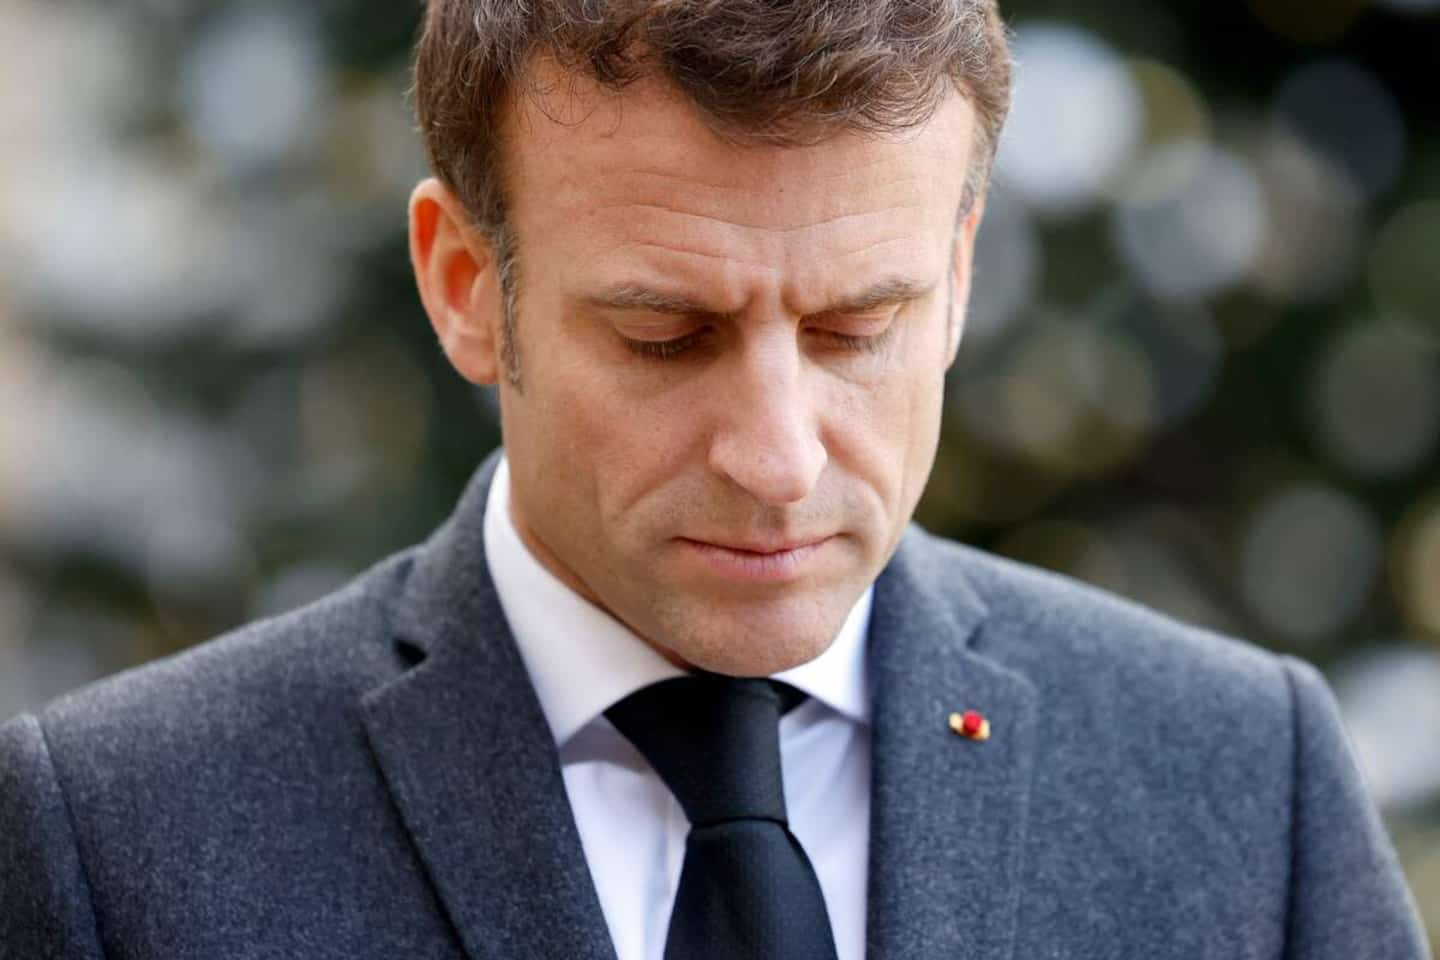 Macron pays tribute to the victims of the attacks against Charlie Hebdo and the Hyper Cacher